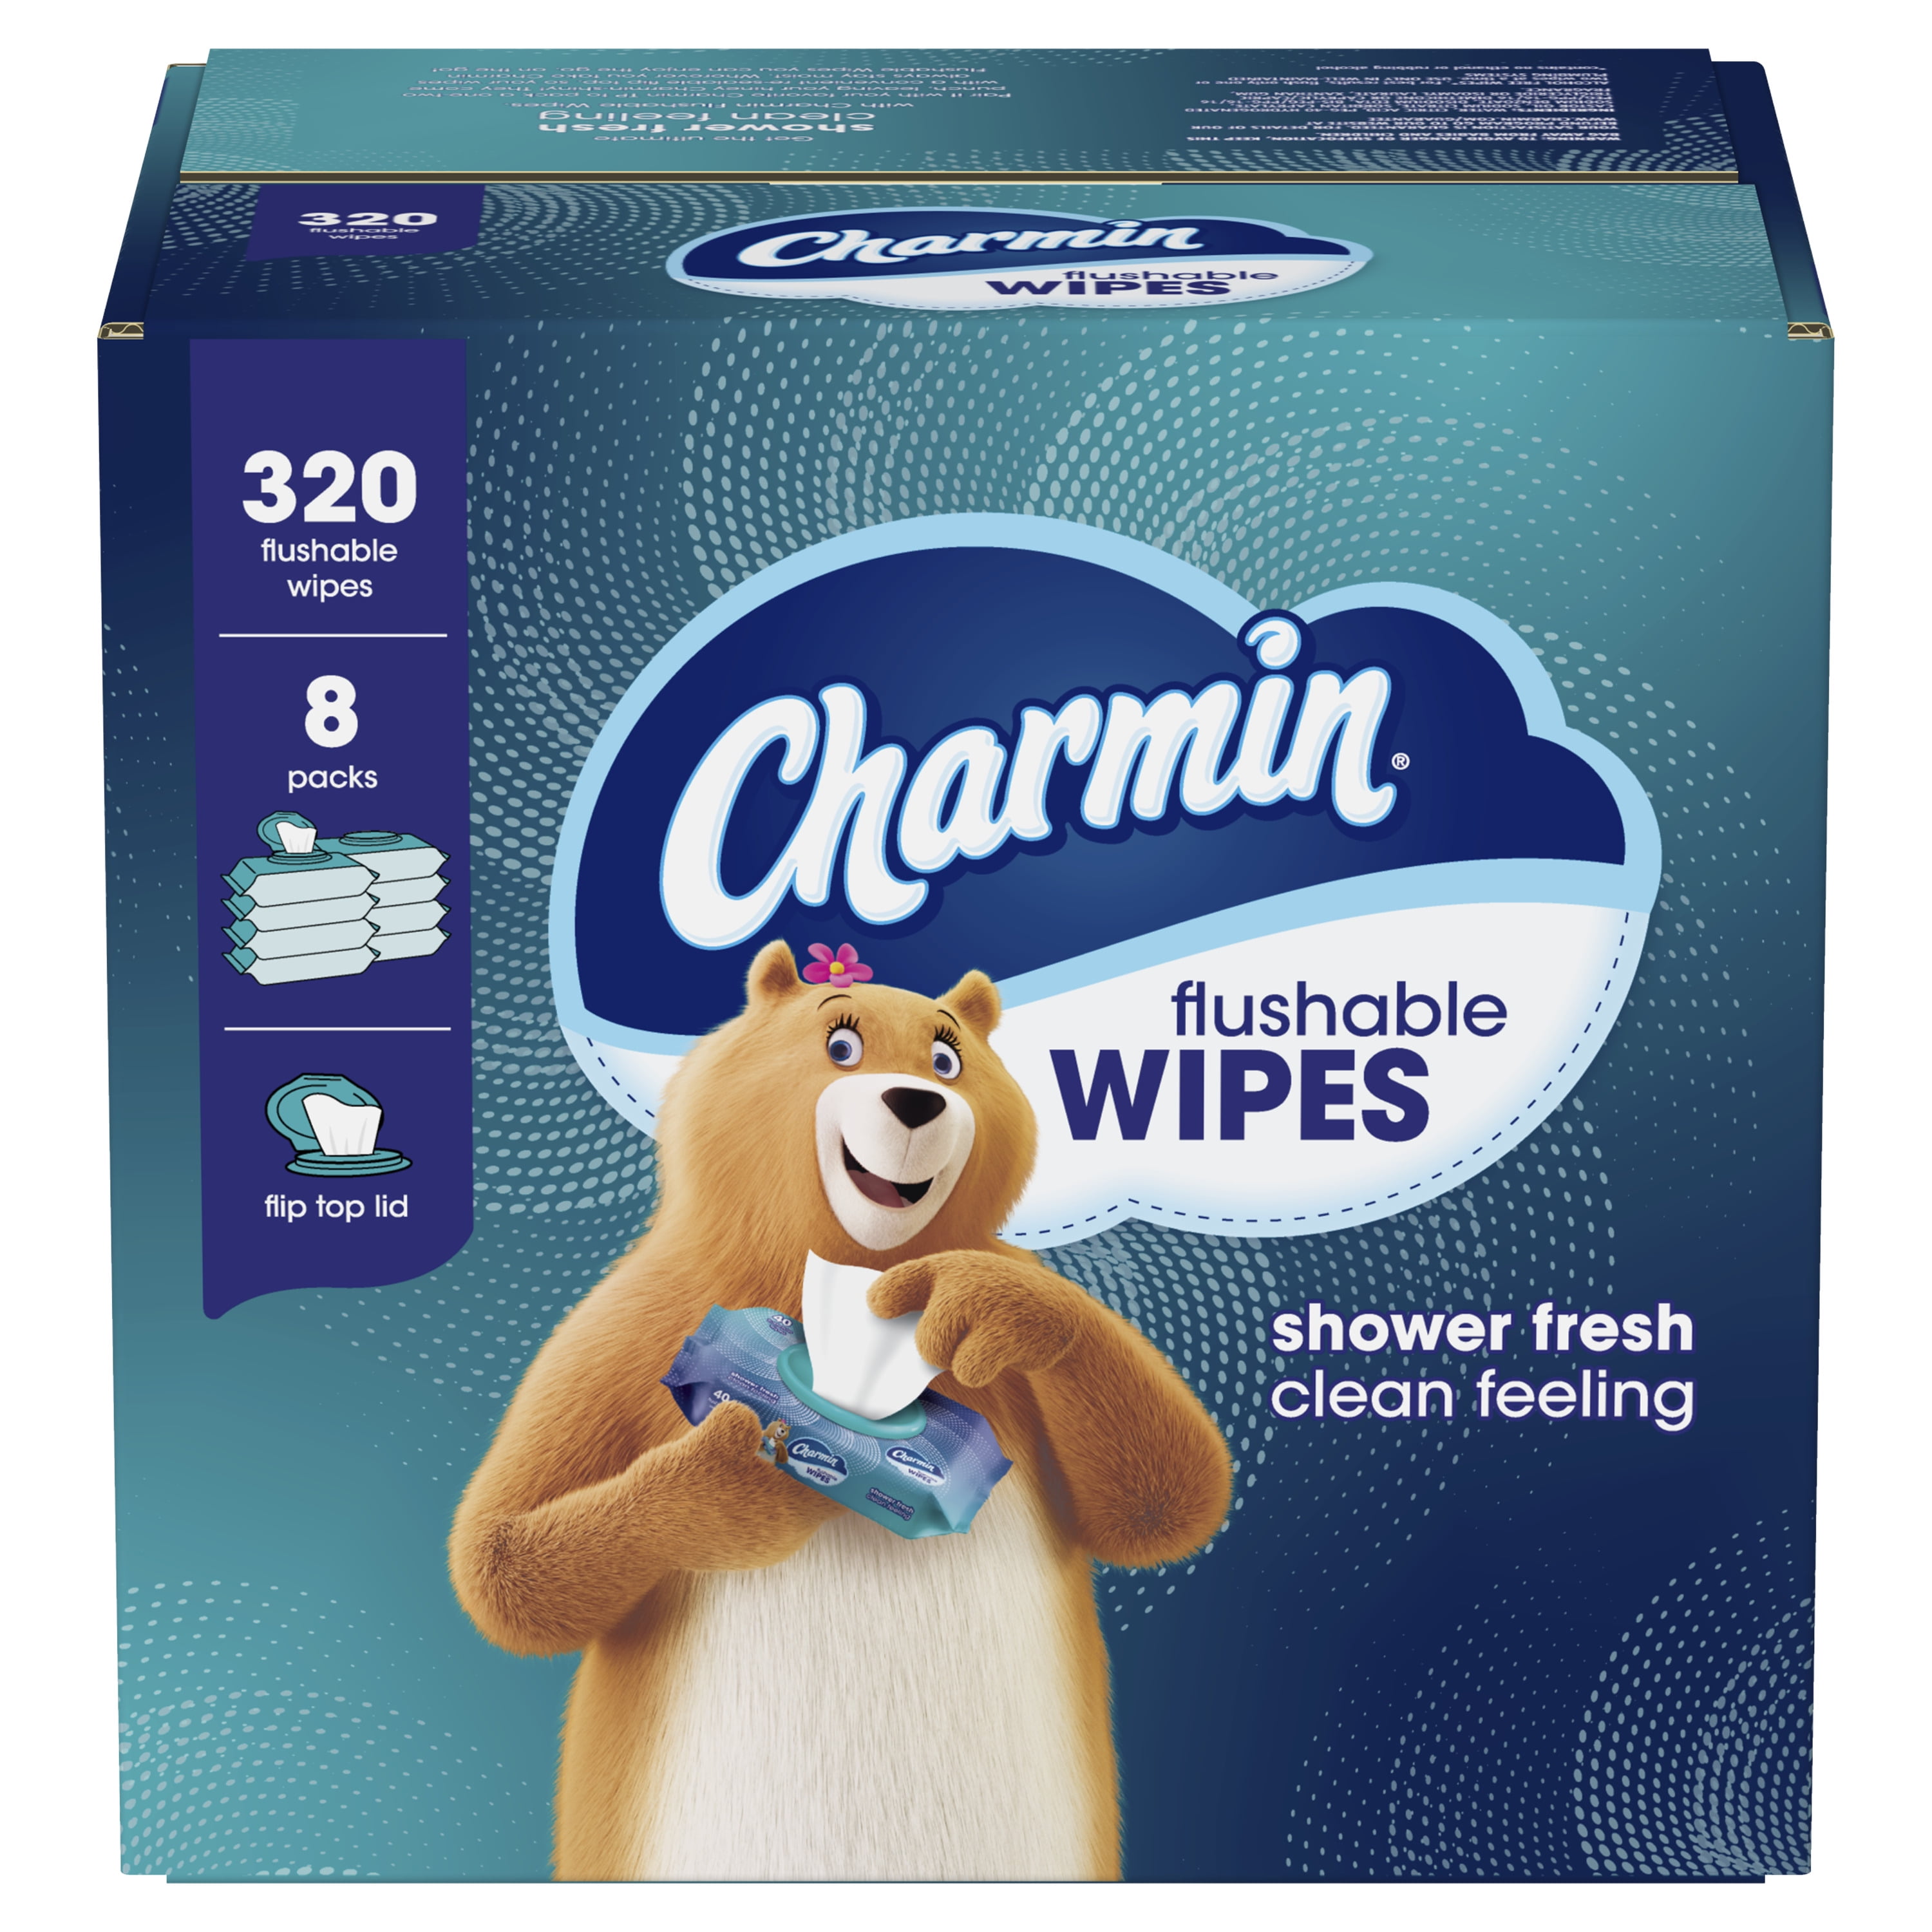 Charmin Wipes, Flushable - 8 - 40 ct packs [320 wipes]